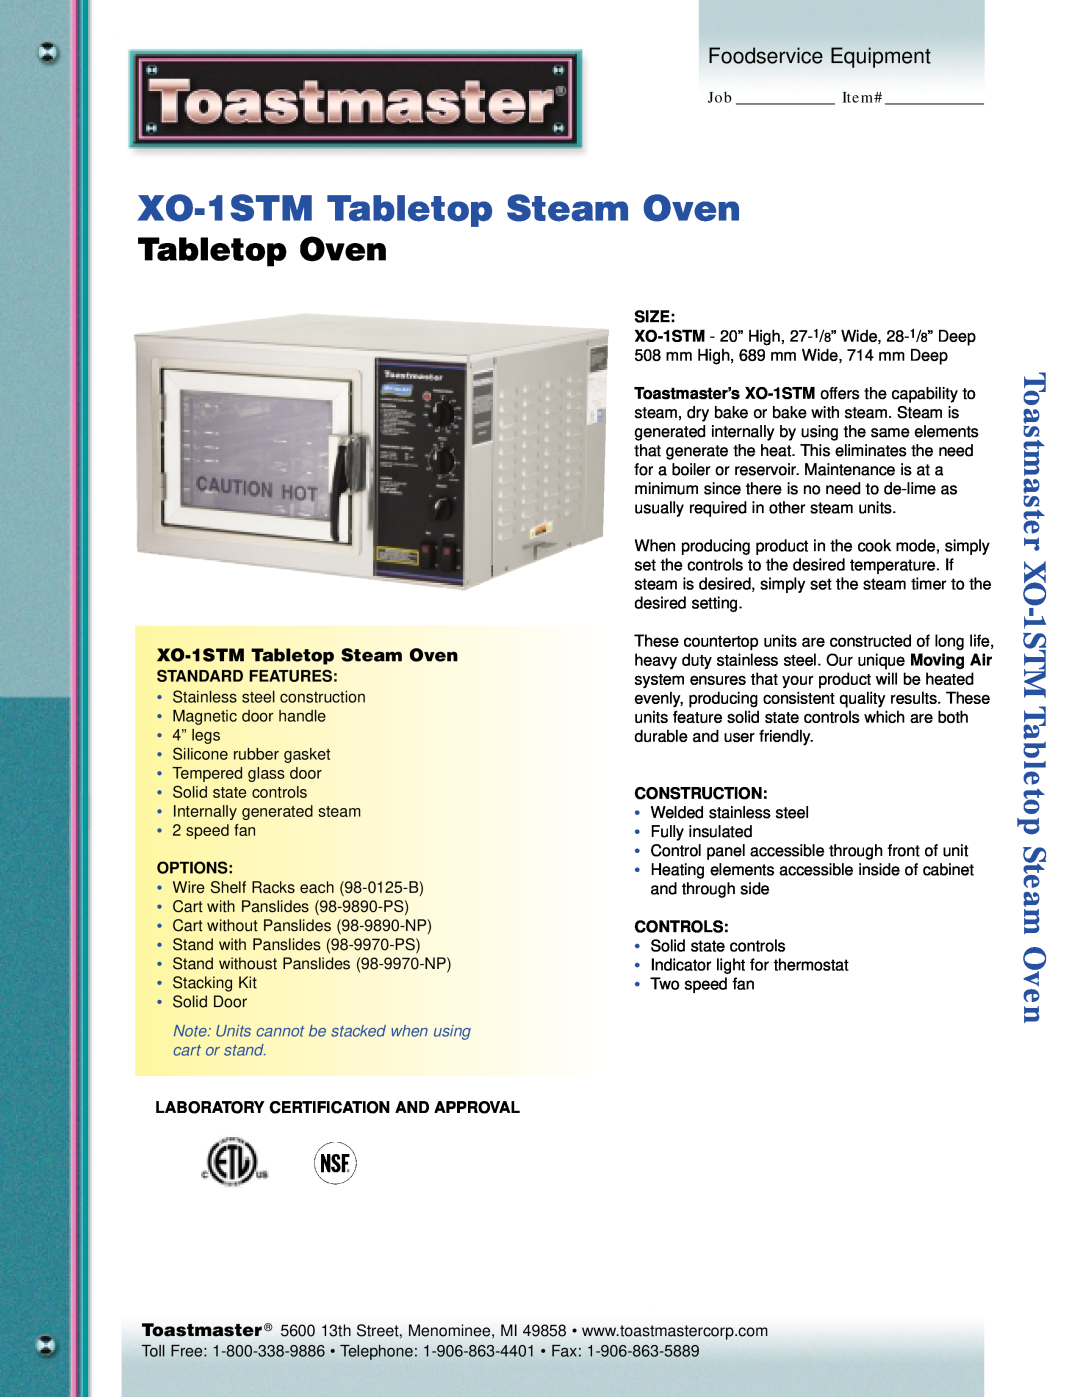 Toastmaster manual Tabletop Oven, Toastmaster XO-1STMTabletop Steam Oven, Foodservice Equipment 